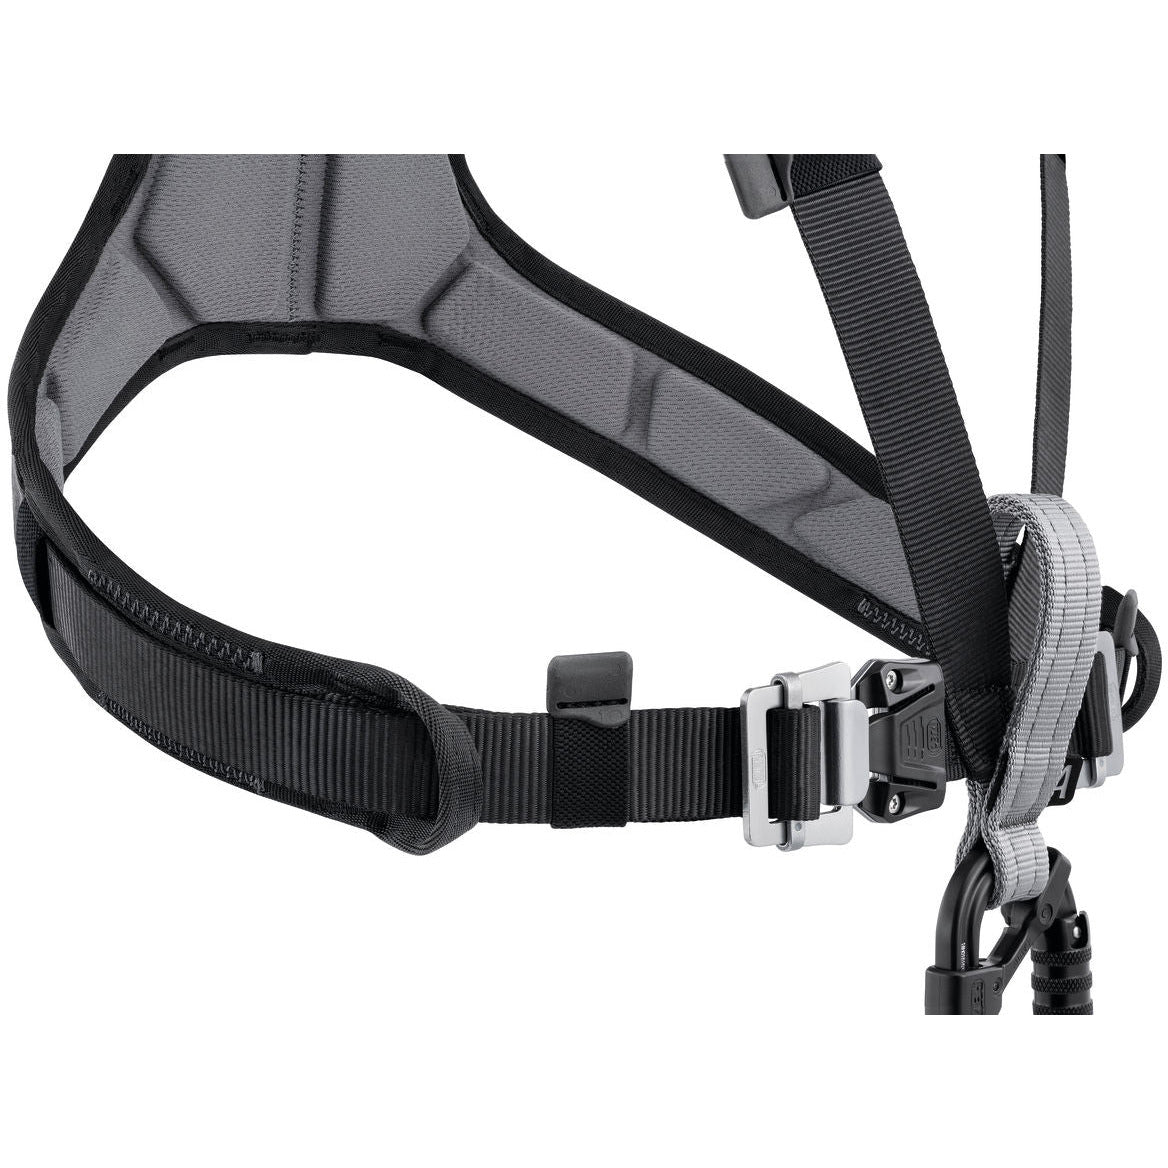 Chest'Air Chest Harness